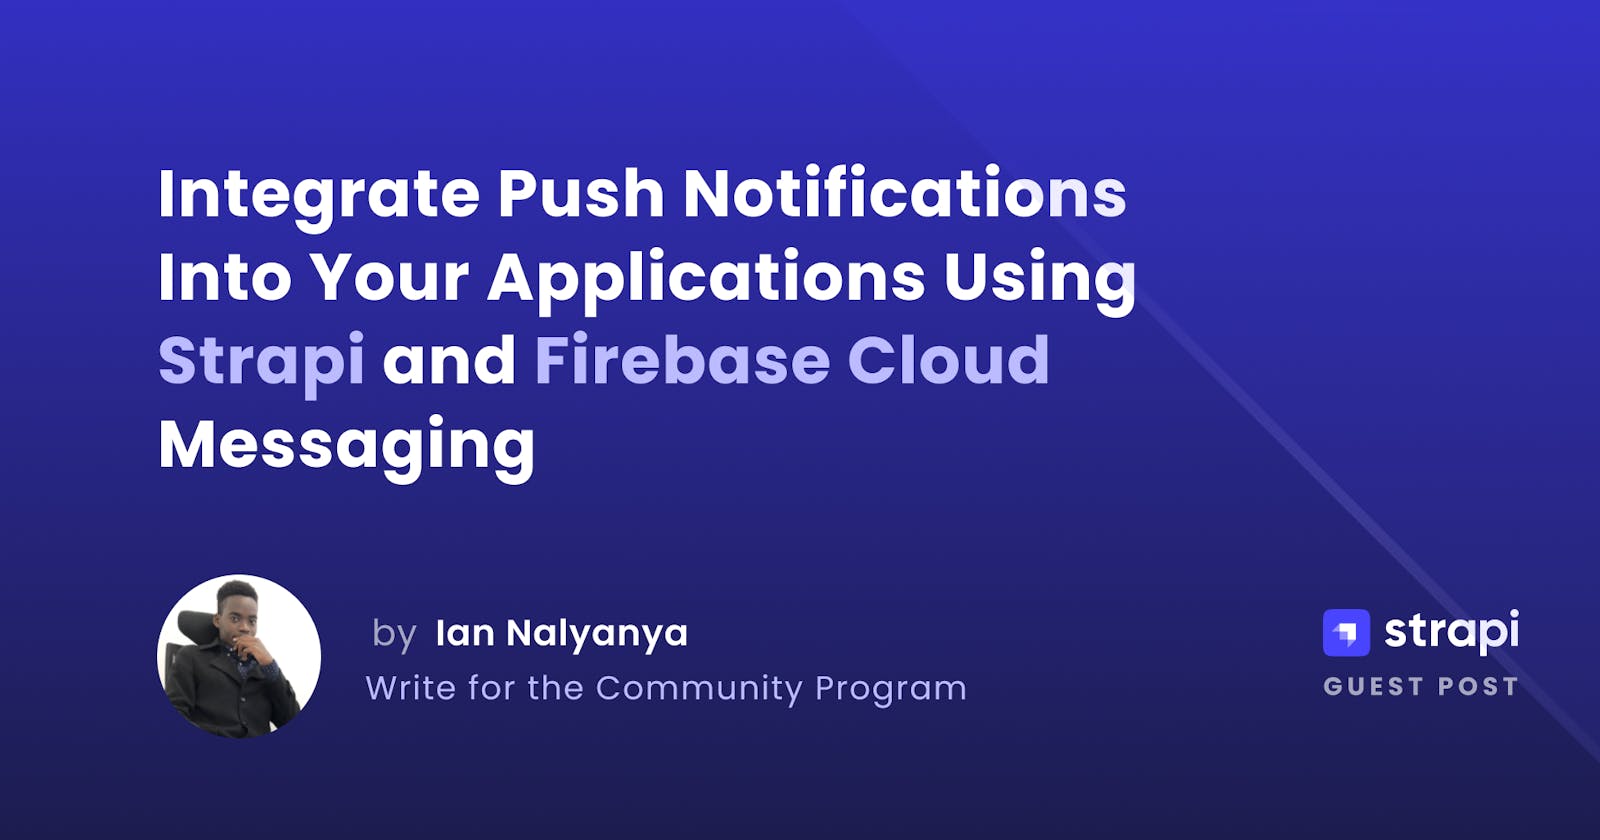 How to Integrate Push Notifications Into Your Applications Using Strapi and Firebase Cloud Messaging